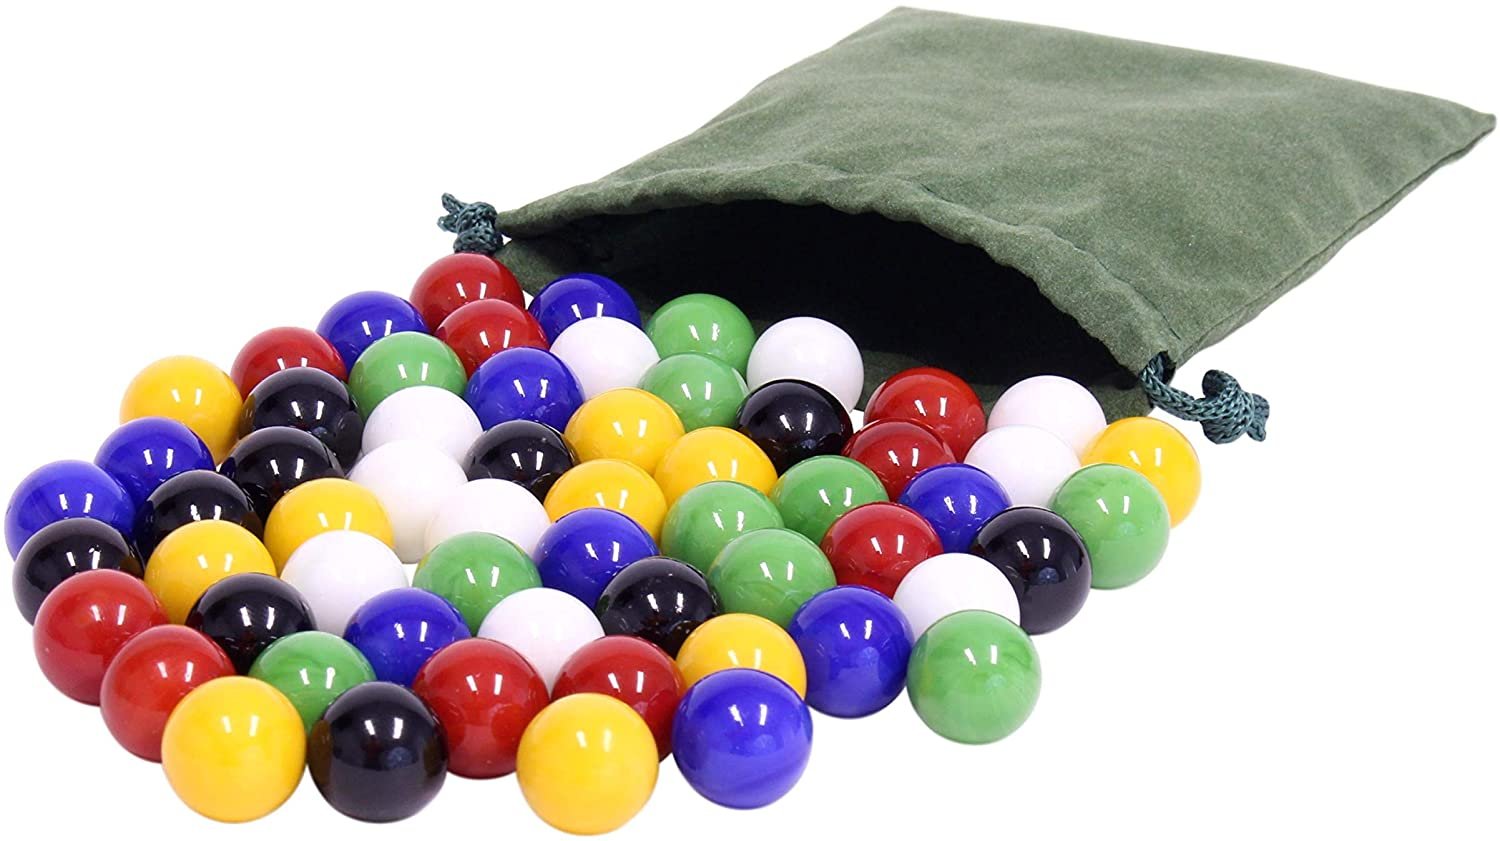 AmishToyBox.com Bag of 60 Glass Marbles - Replacement Marbles for Chinese Checkers - Large 3/4" (18mm) Diameter